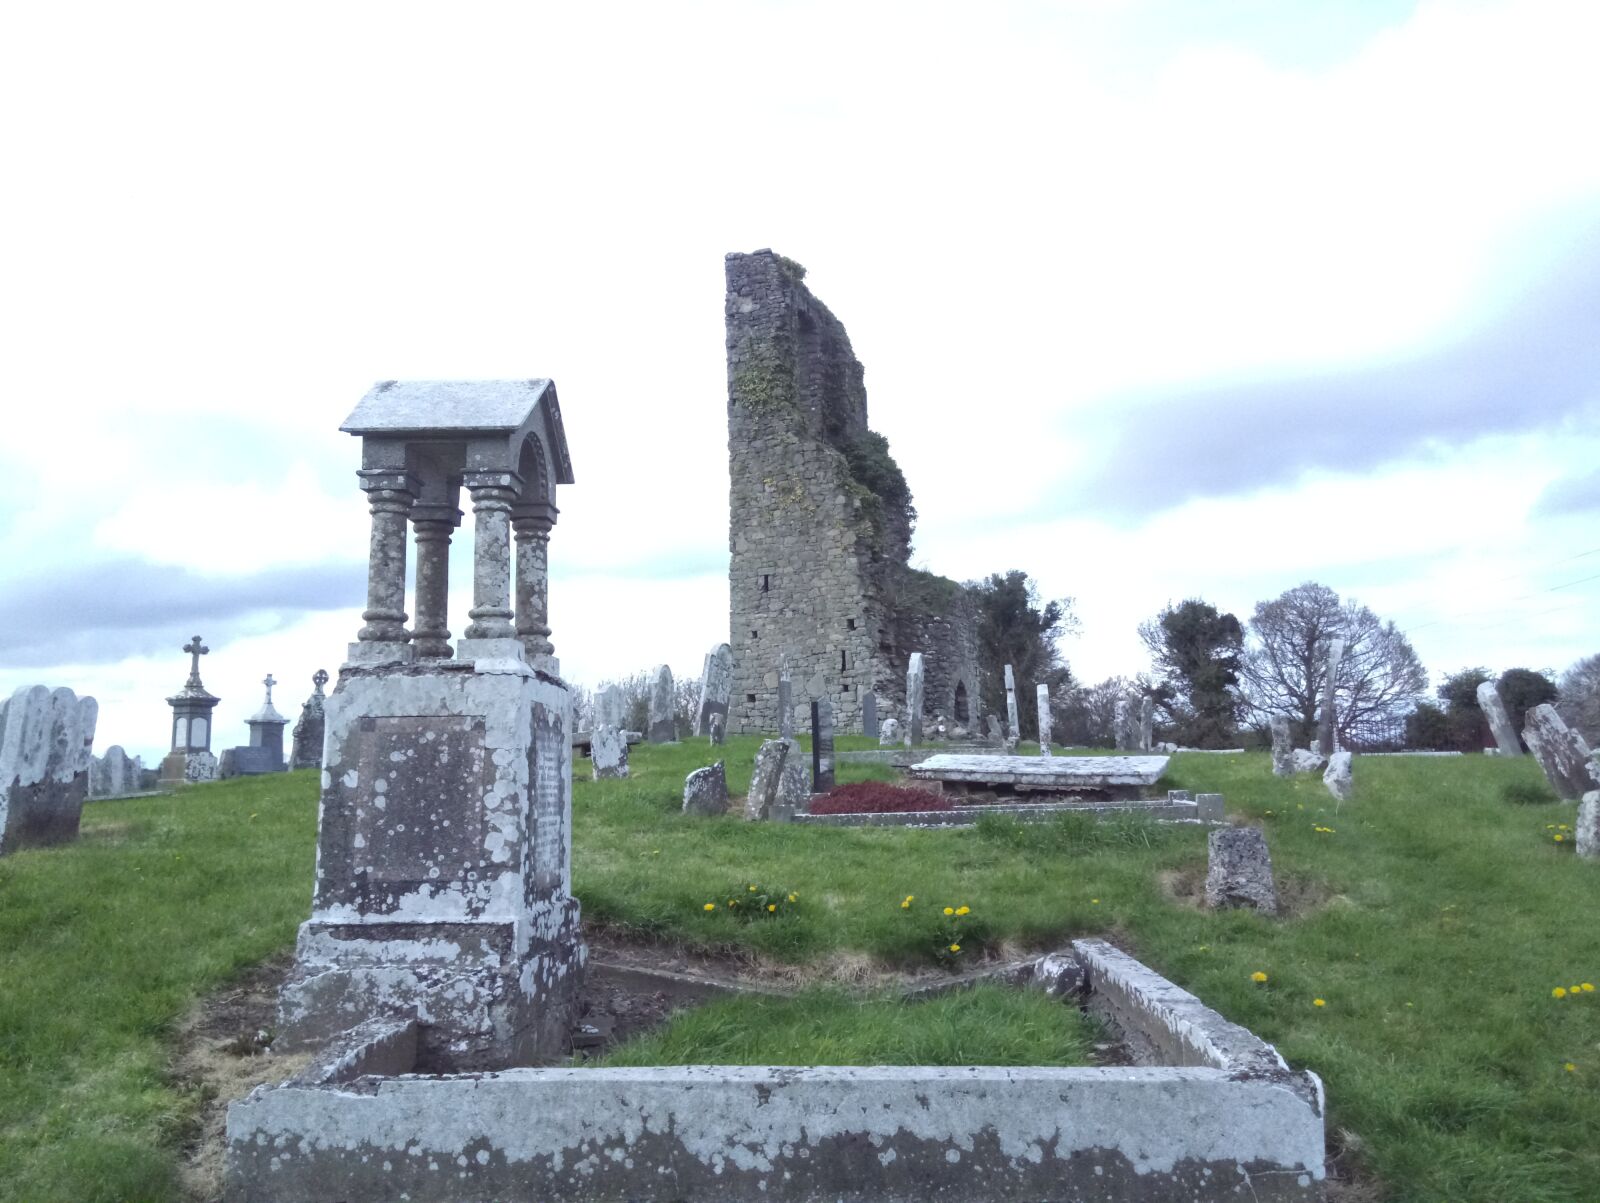 HTC ONE A9S sample photo. Ruins, graveyard, ireland photography